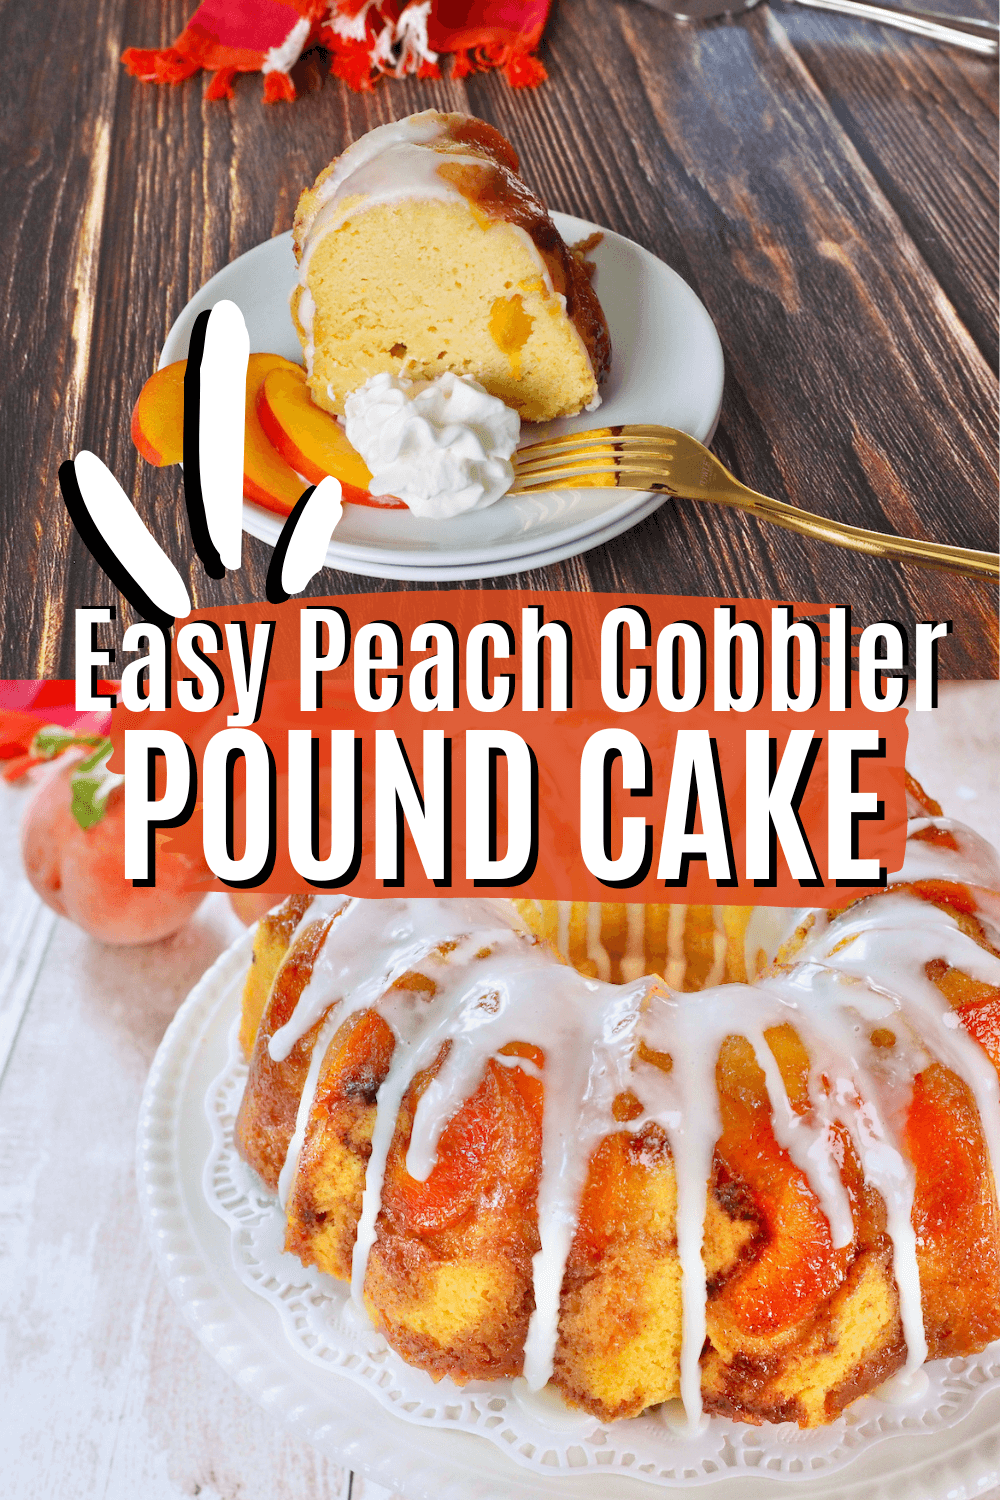 Slice of peach pound cake on plate and whole peach bundt cake on platter to pin.